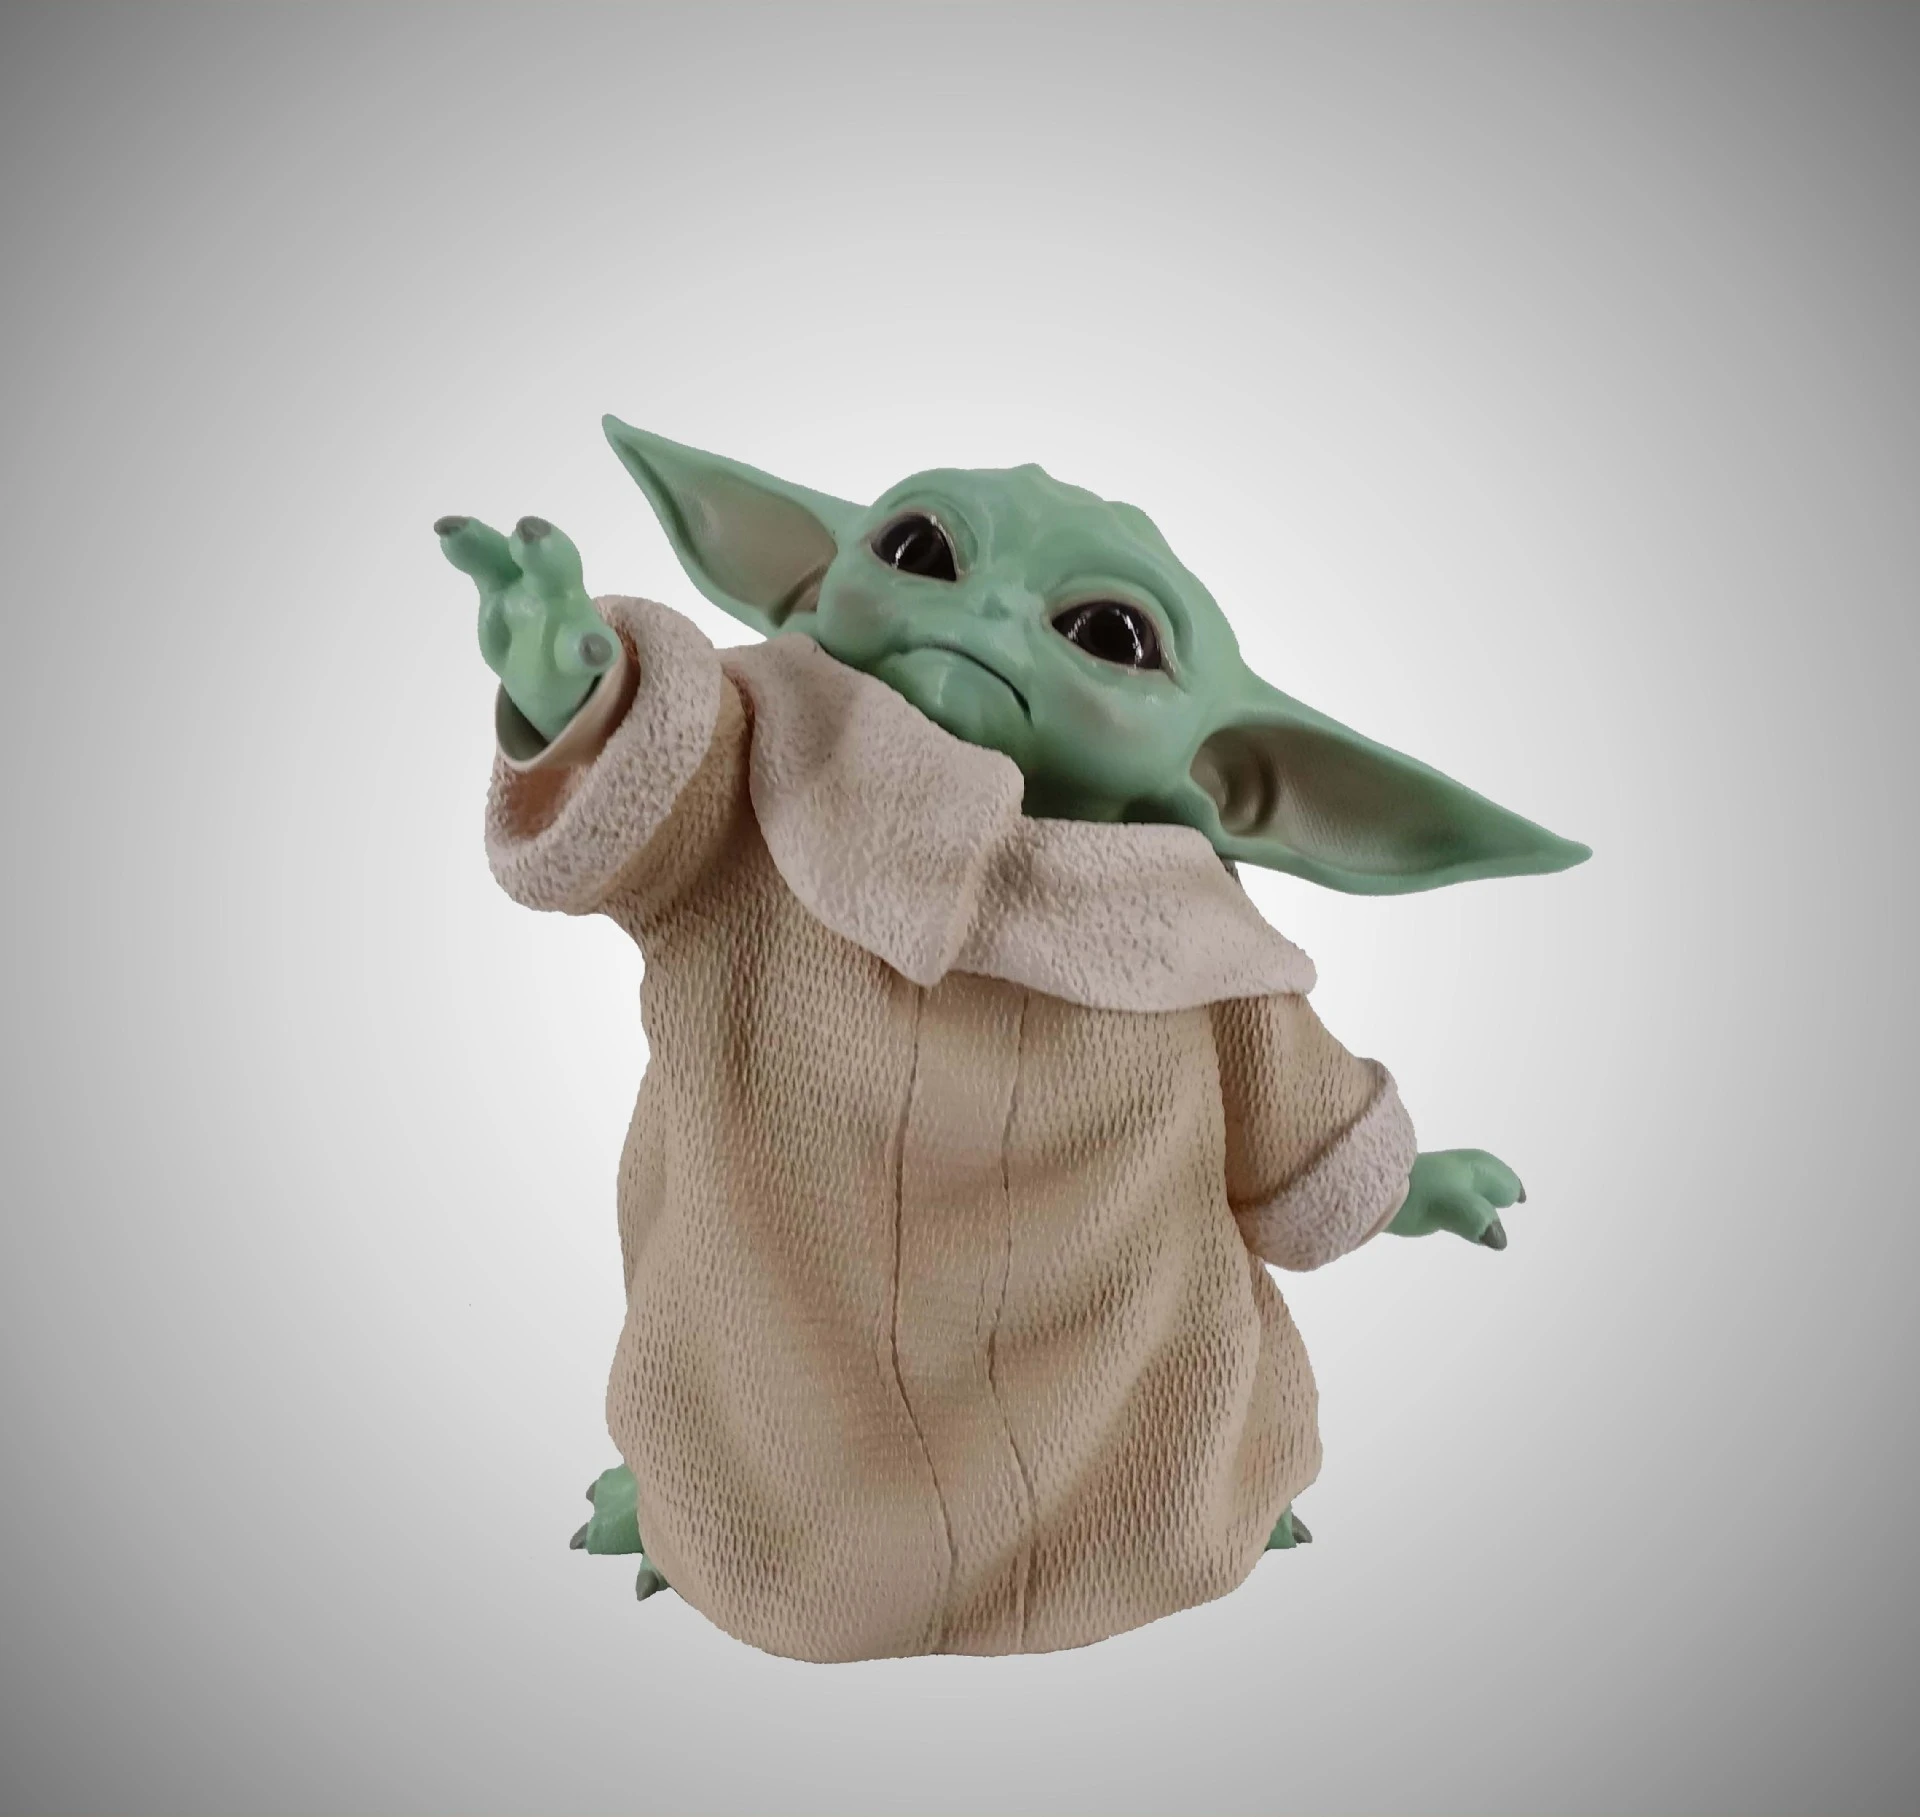 Pre Sale Anime Star Wars Baby Yoda Action Figure Toy The Force Awakens Figure Pvc Model Toys Action Figures Aliexpress